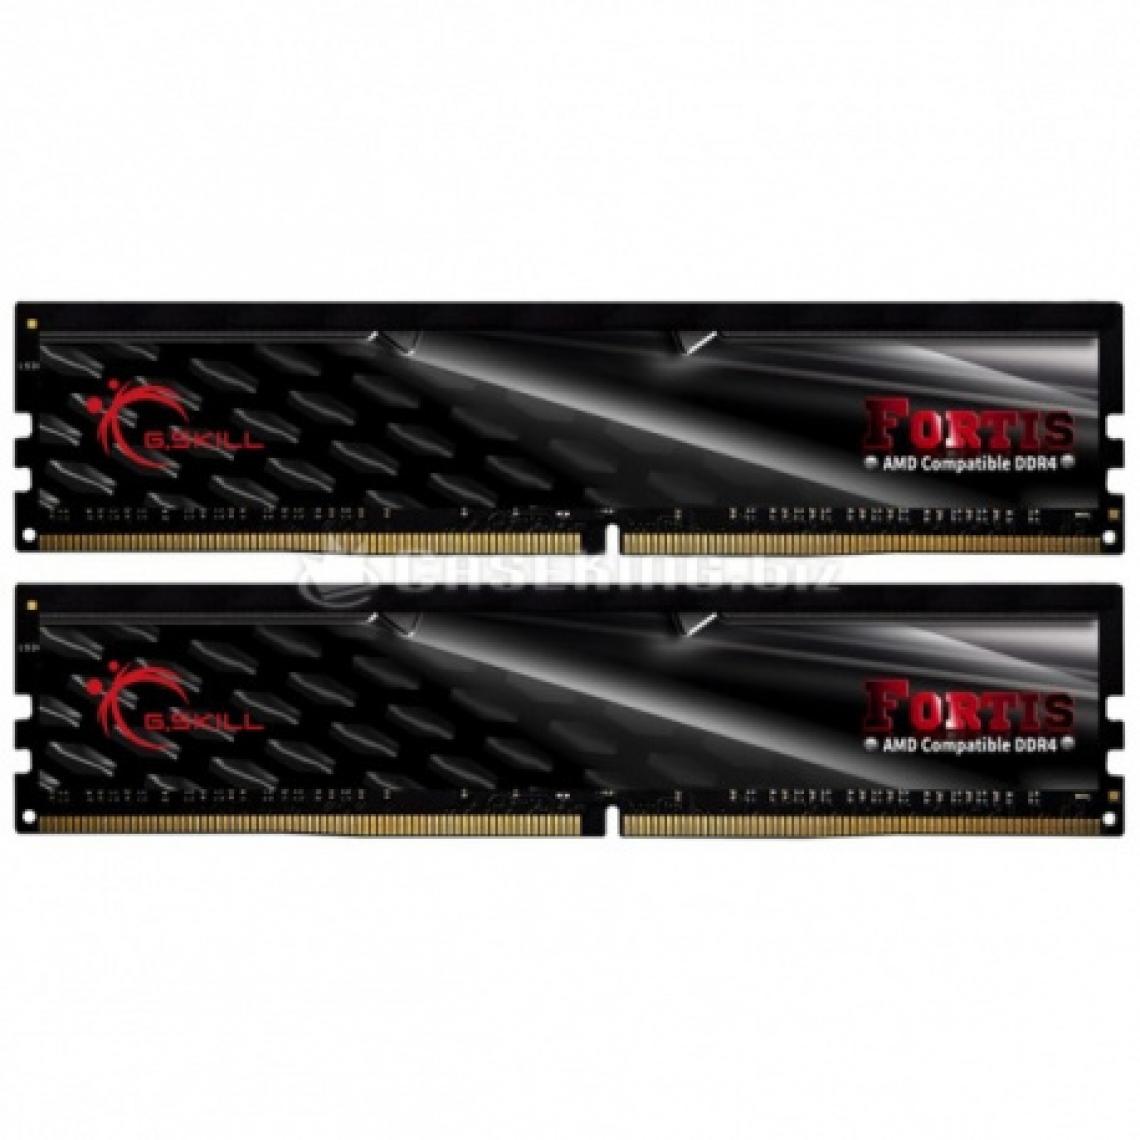 Gskill - Fortis Series 16 Go (2x 8 Go) DDR4 2400 MHz CL15 - RAM PC Fixe